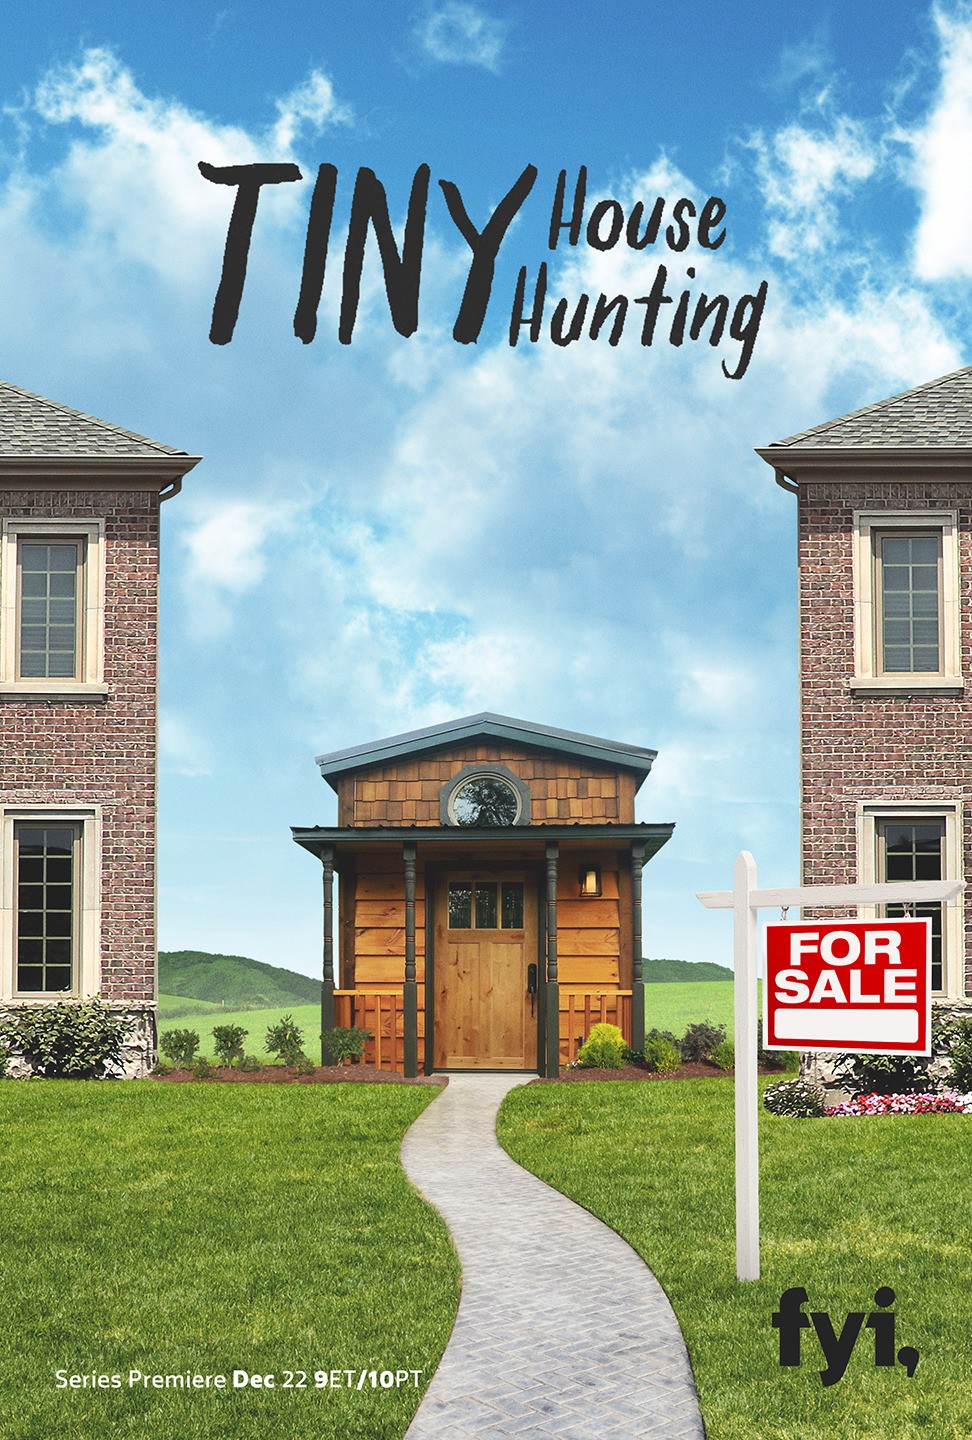 Extra Large TV Poster Image for Tiny House Hunting 